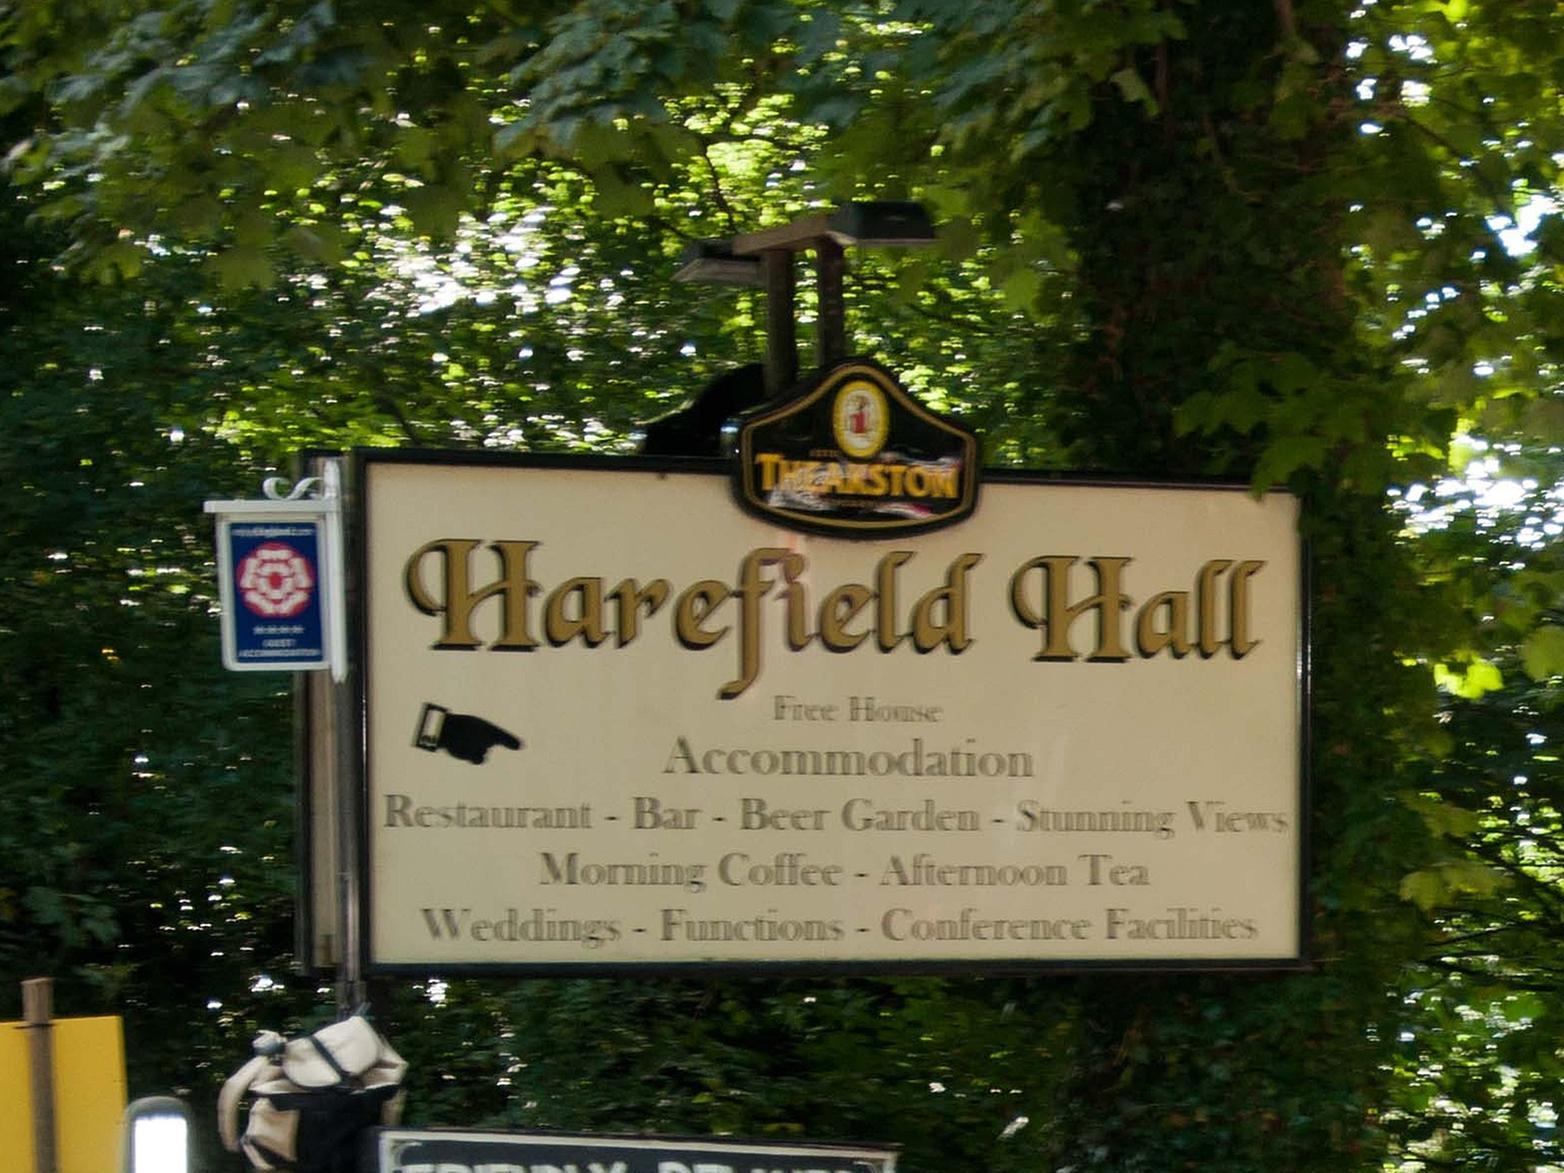 Wander around Harefield Hall in Pateley Bridge on November 30 between 9.30am and 4.30pm to find a lovely vintage Christmas gift.